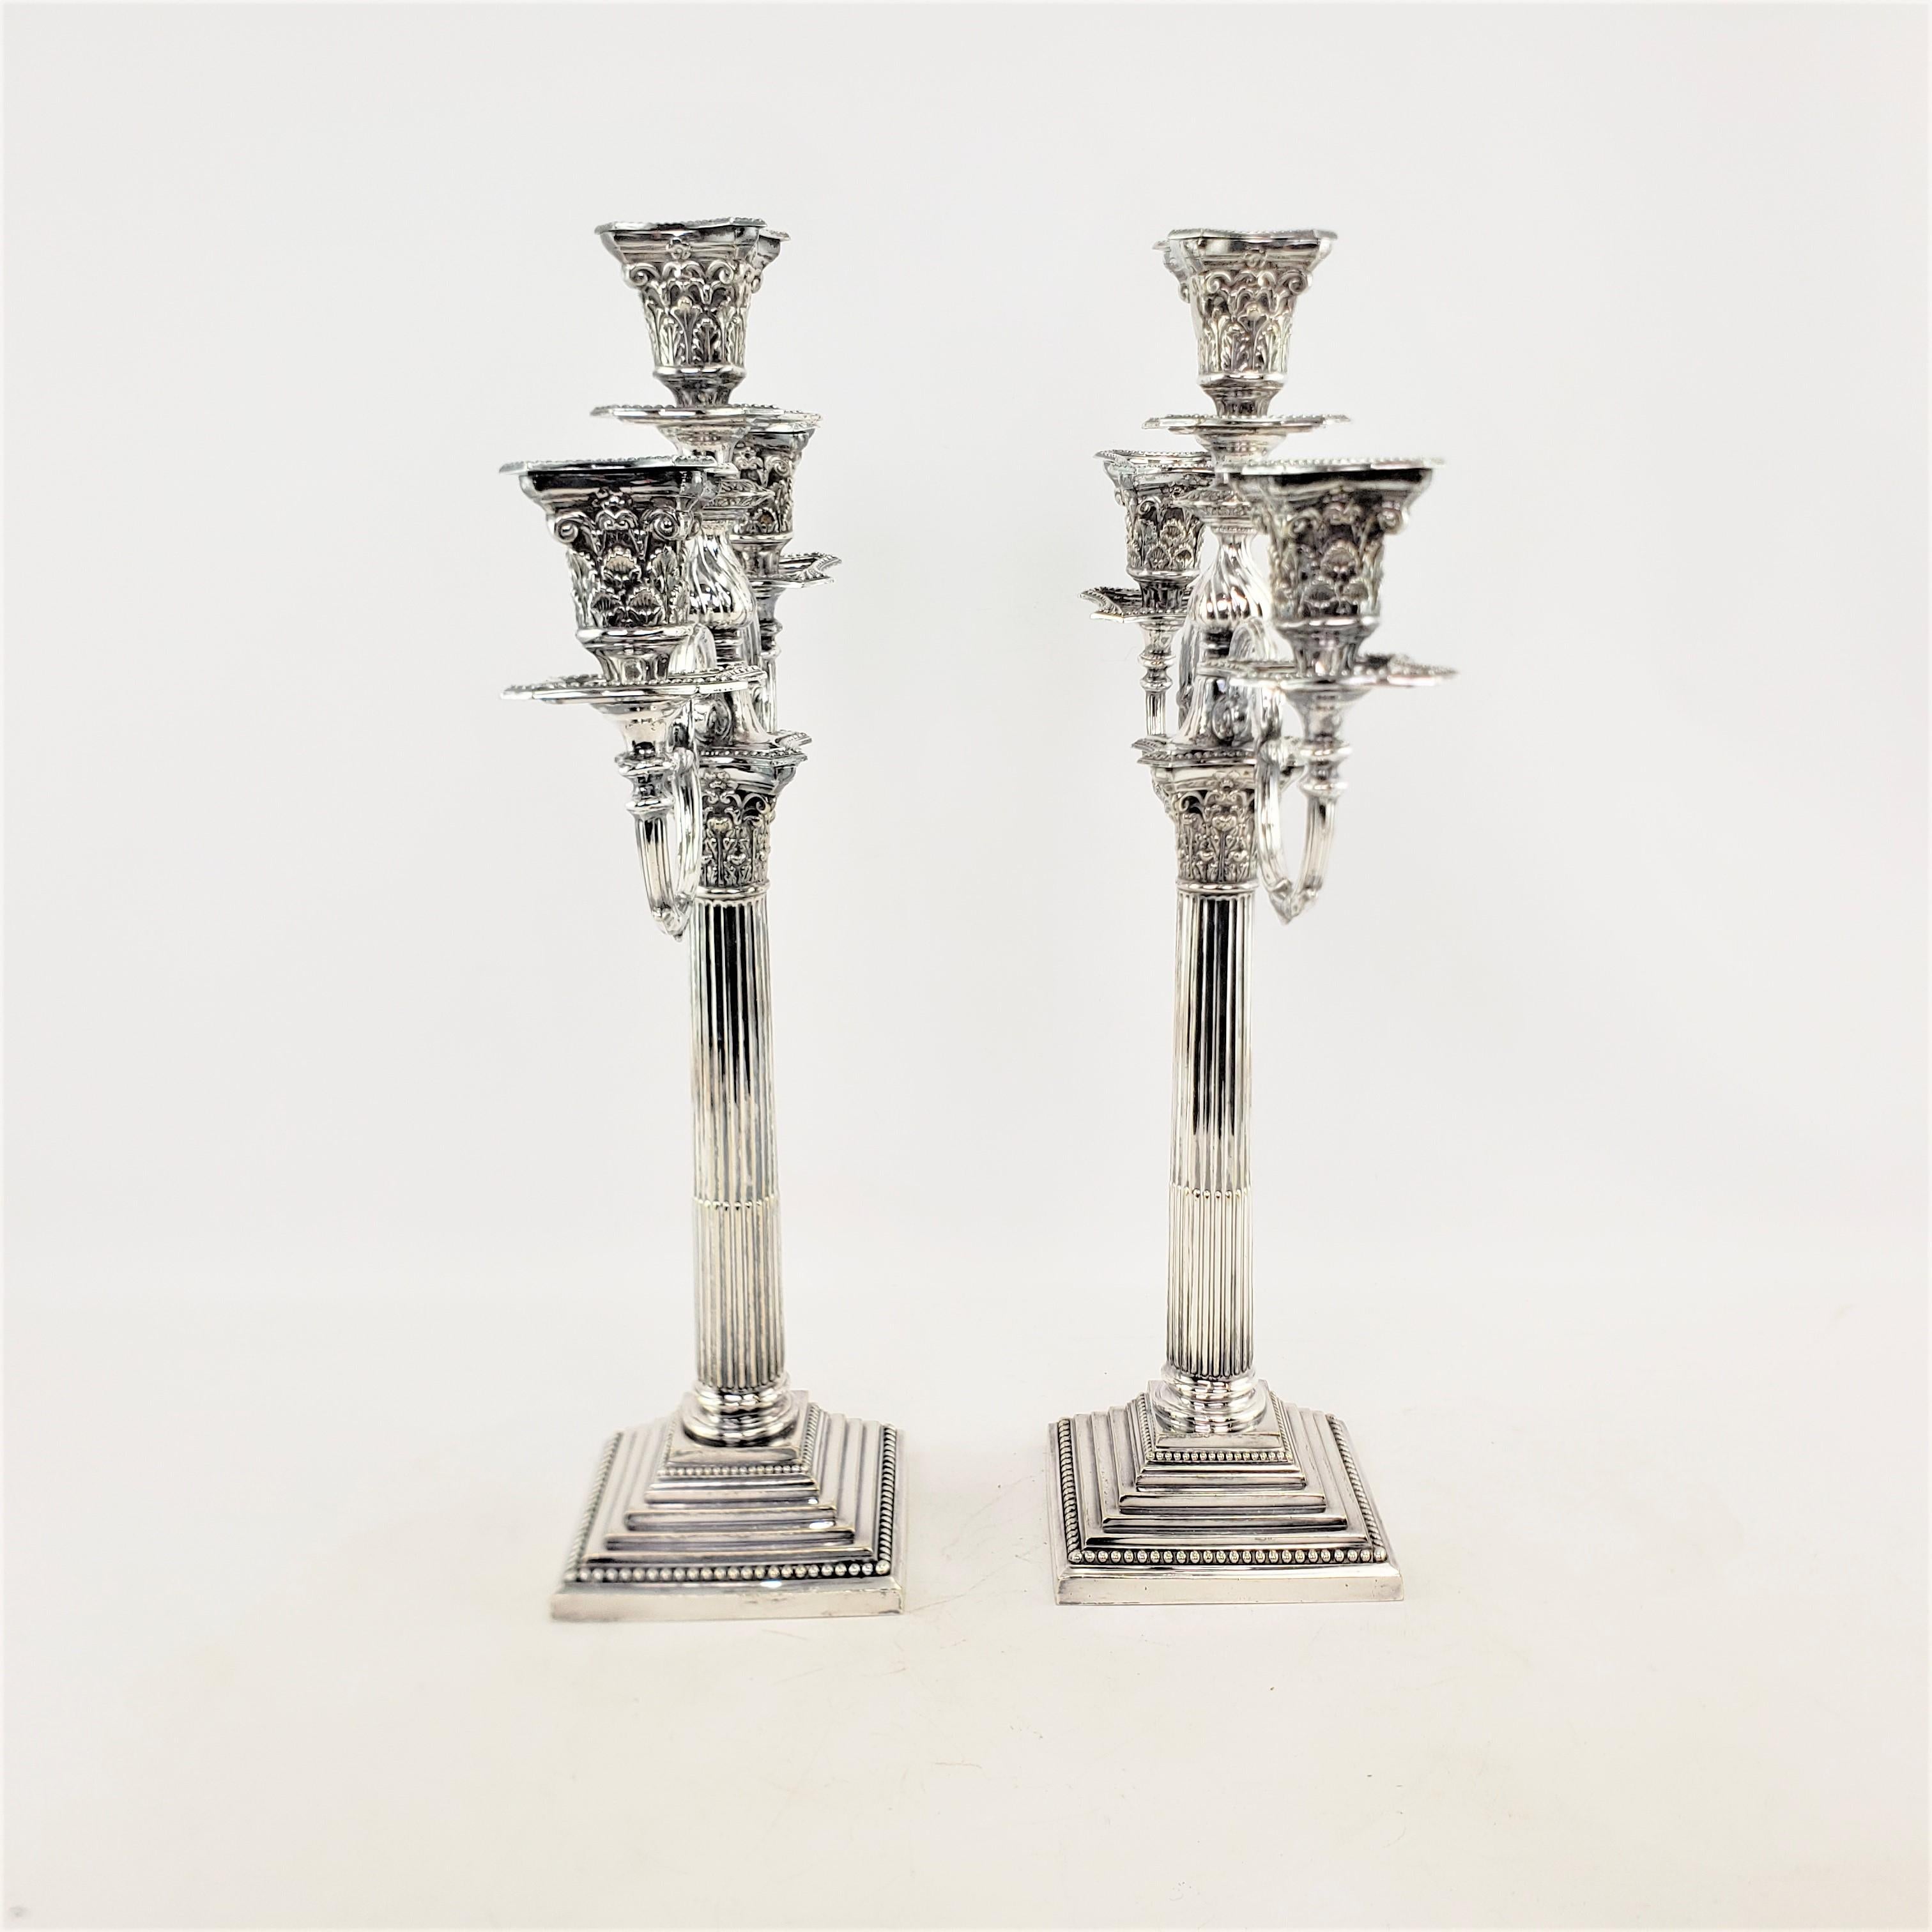 Machine-Made Pair of Antique Mappin & Webb Convertible Candelabras in Corinthian Column Style For Sale